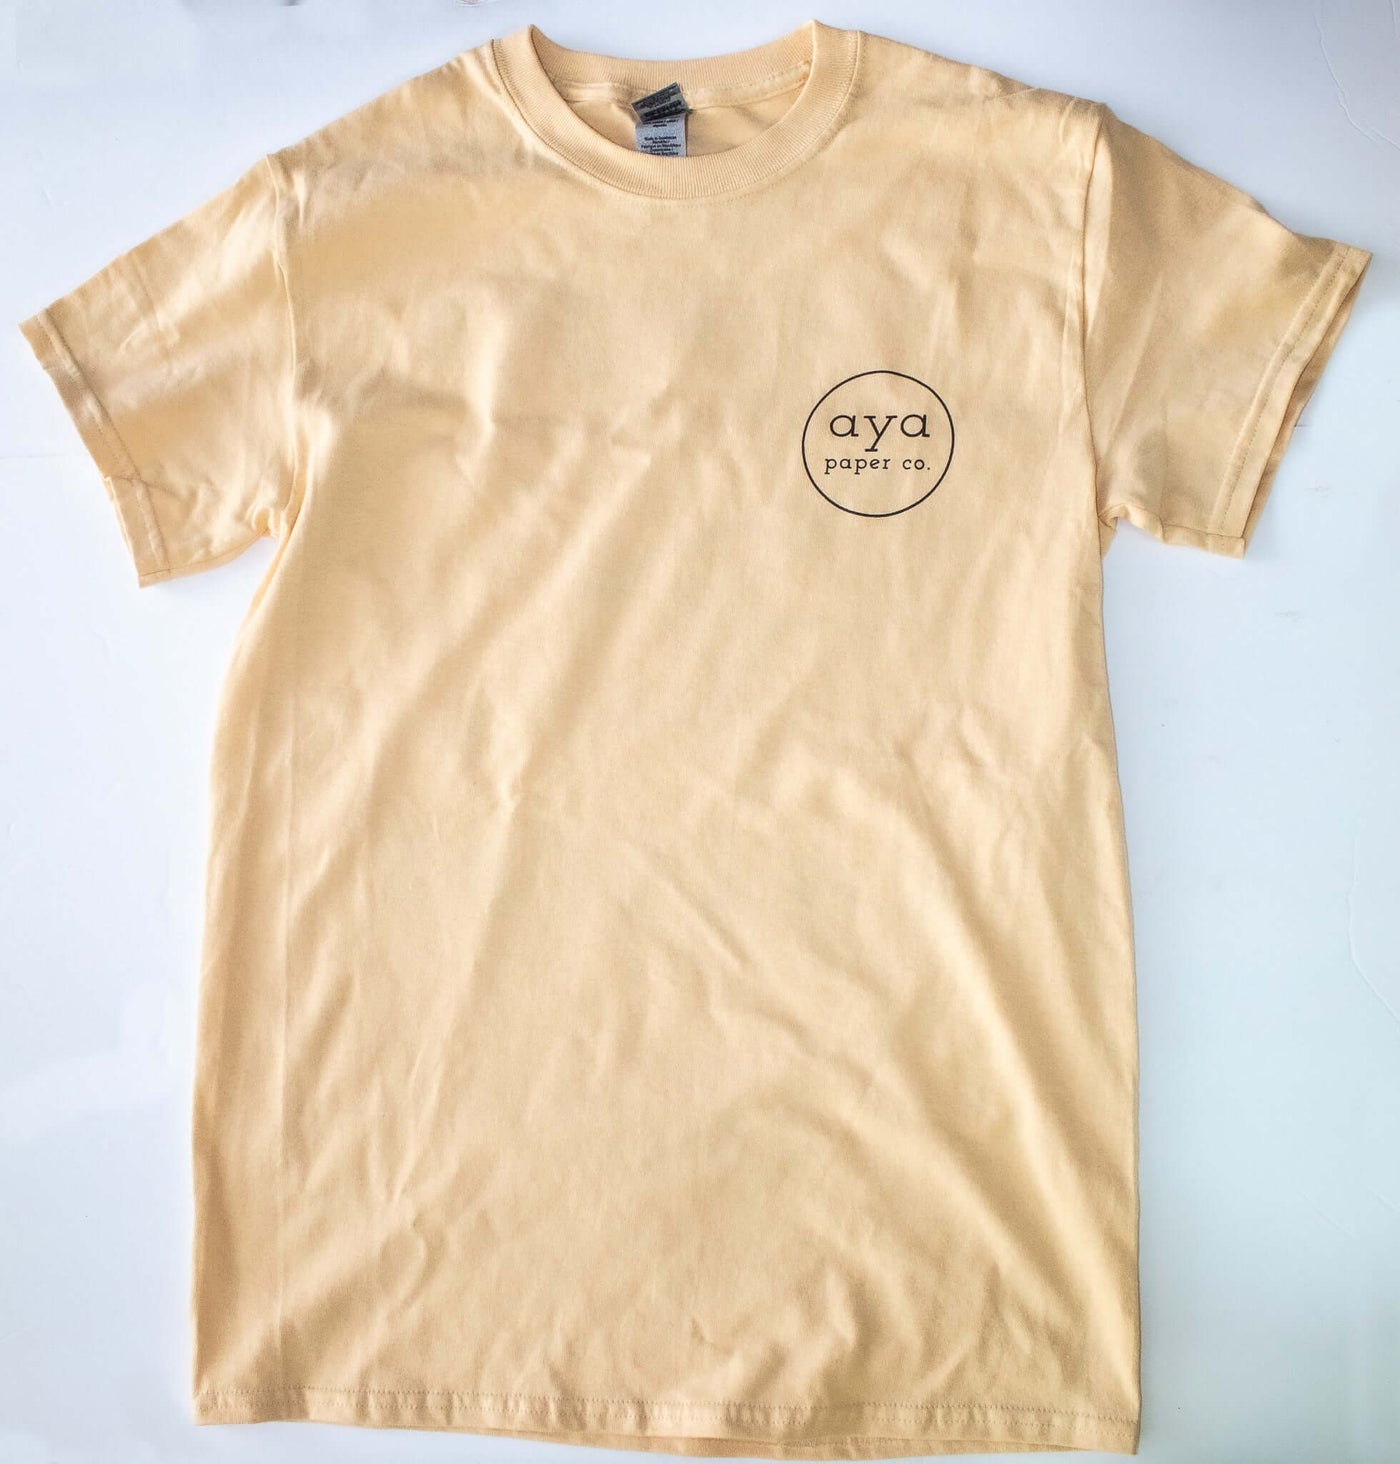 front of the tan colored "Paper Chasers T-Shirt" that has the Aya Paper Co. logo on the chest